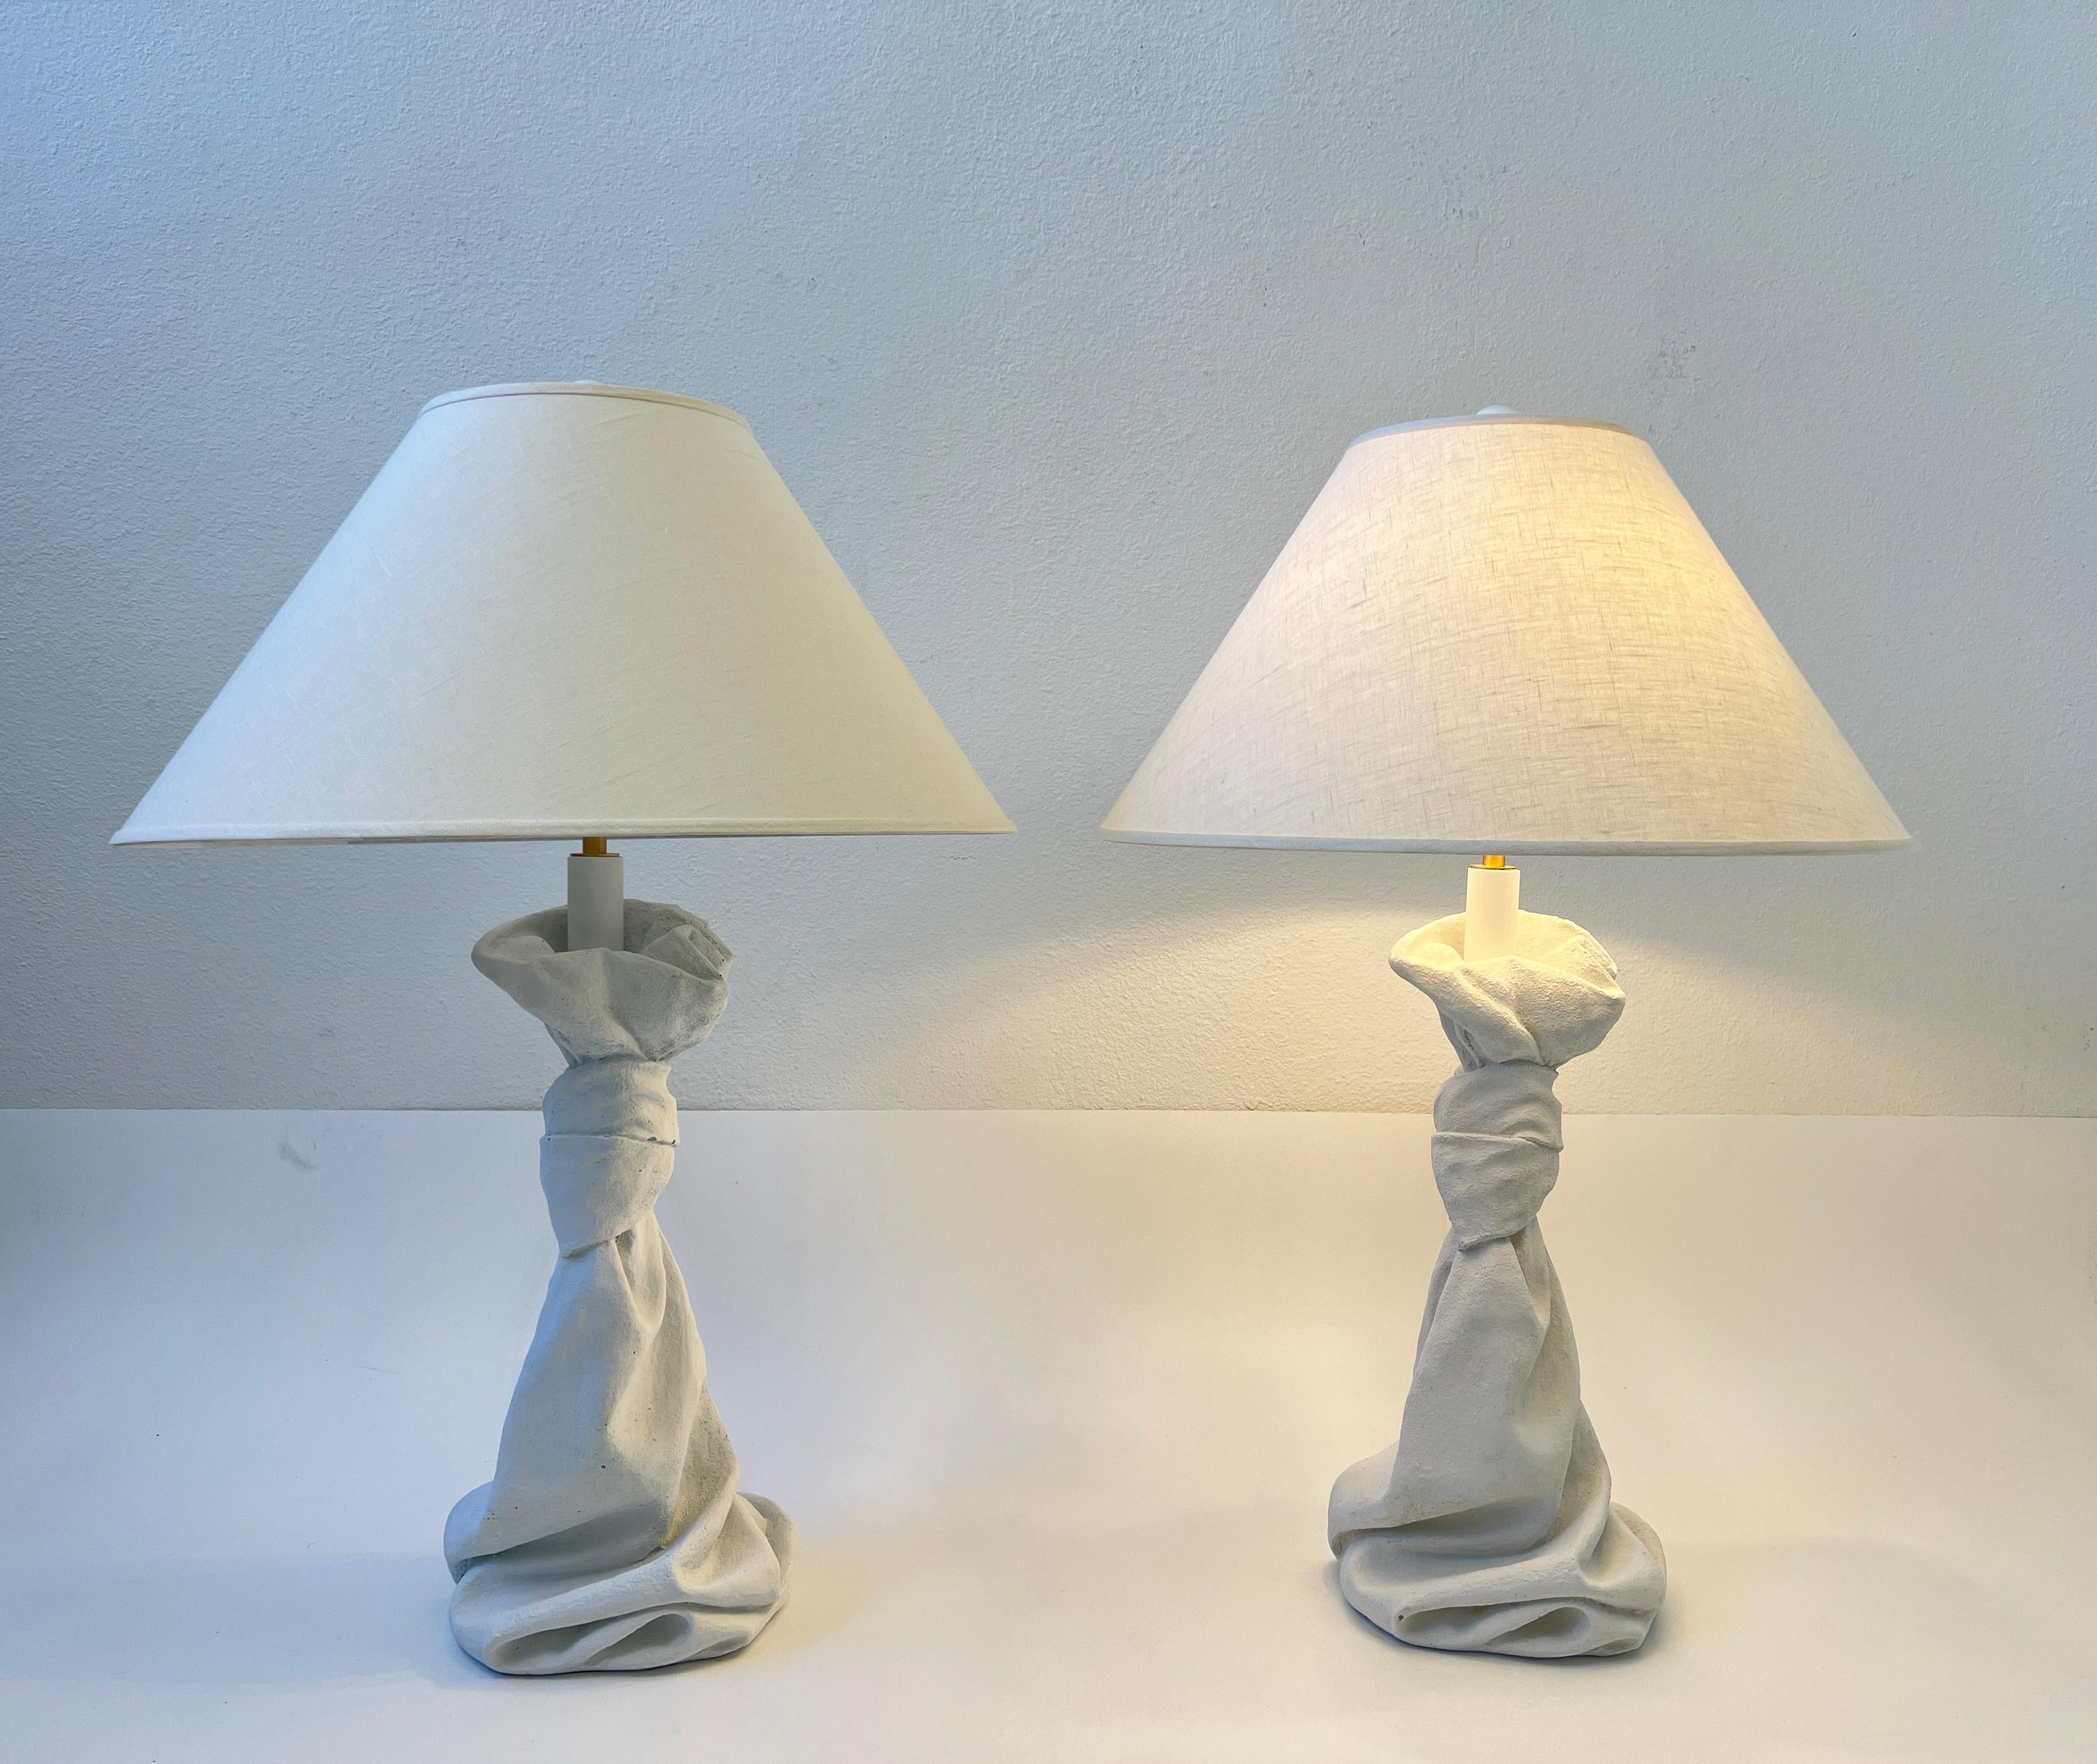 Glamorous pair of white draped plaster and satin brass table lamps in the style of John Dickinson. 
Newly rewired and new vanilla linen shades. 
They take two 75w max Edison lightbulb. 

Measurements: 22” Diameter 32.5” High.
Base is 10” Wide,